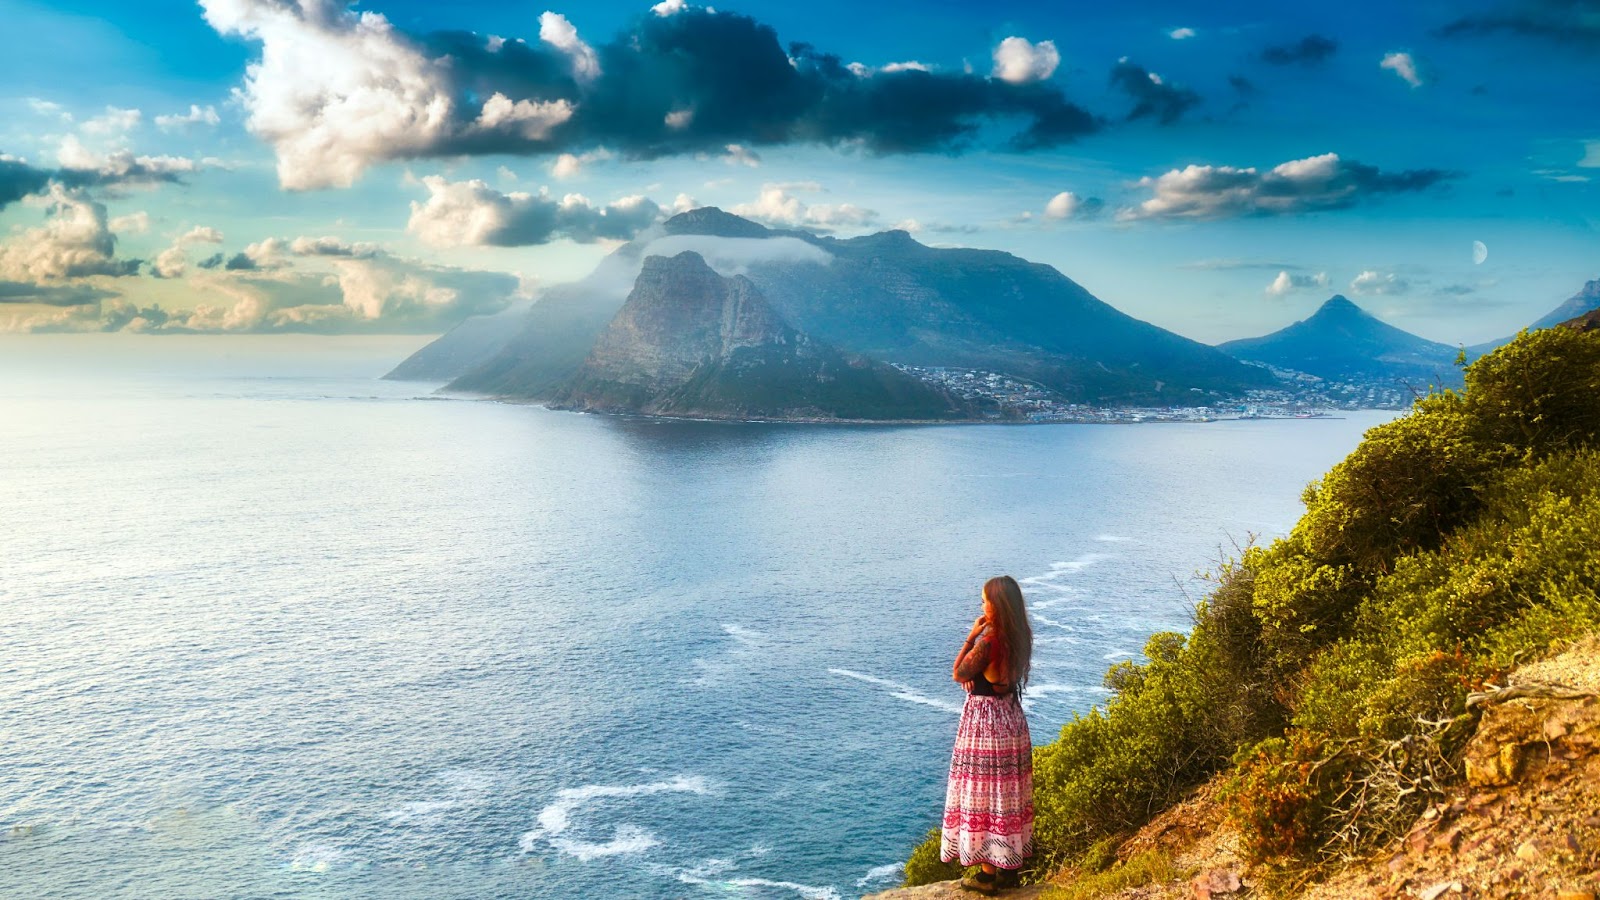 A women admiring the view from Chapmans Peak Drive